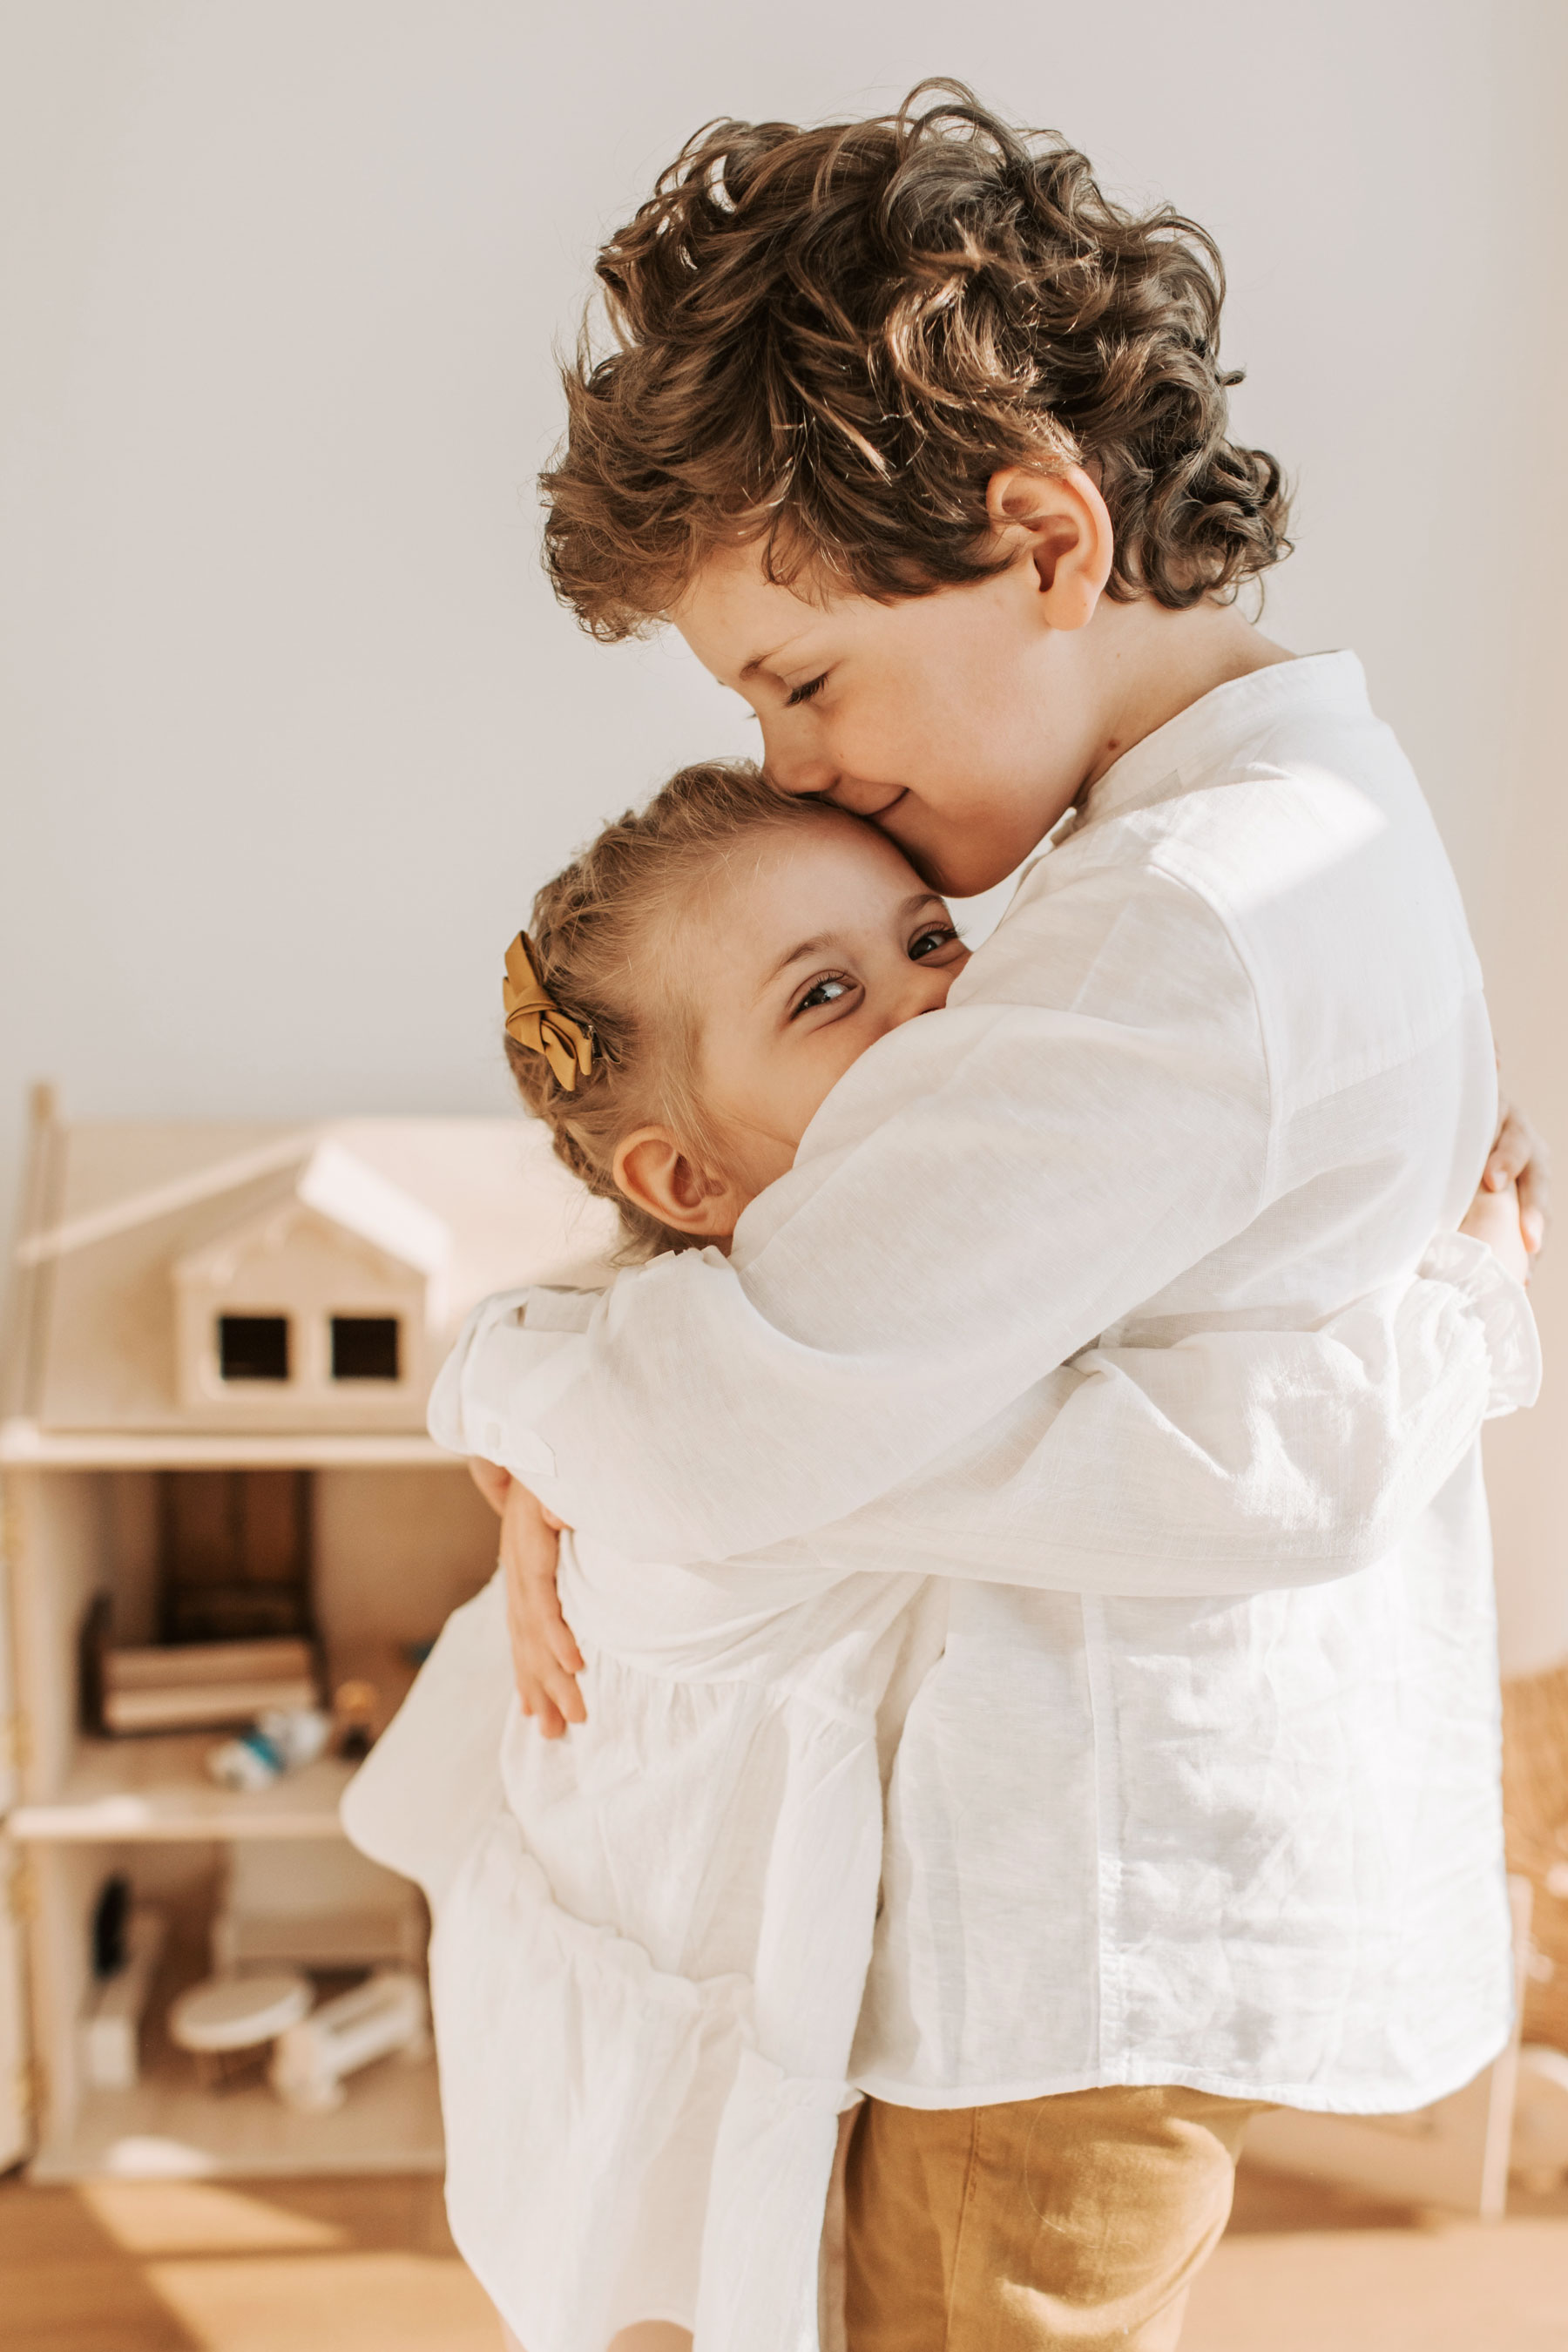 Fostering Healthy Sibling Relationships